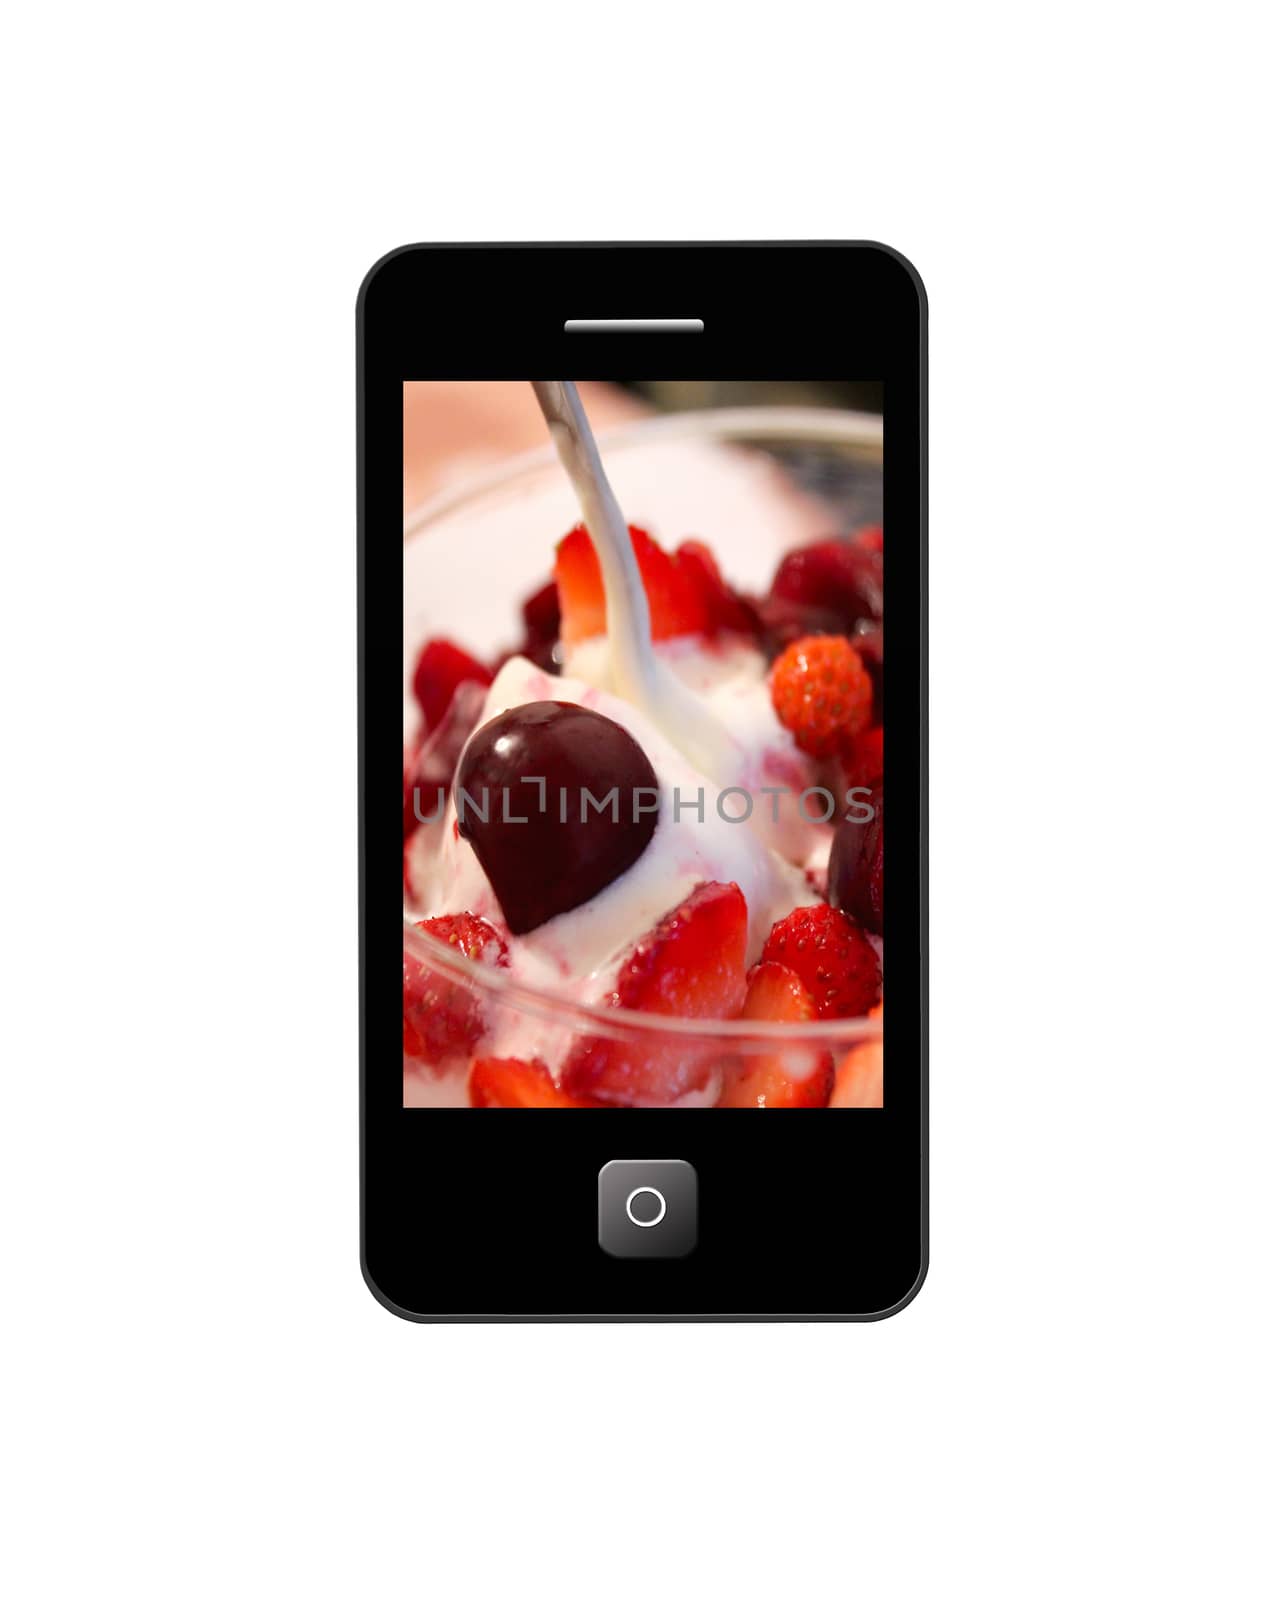 mobile phone with image of ice-cream with cherry by alexmak